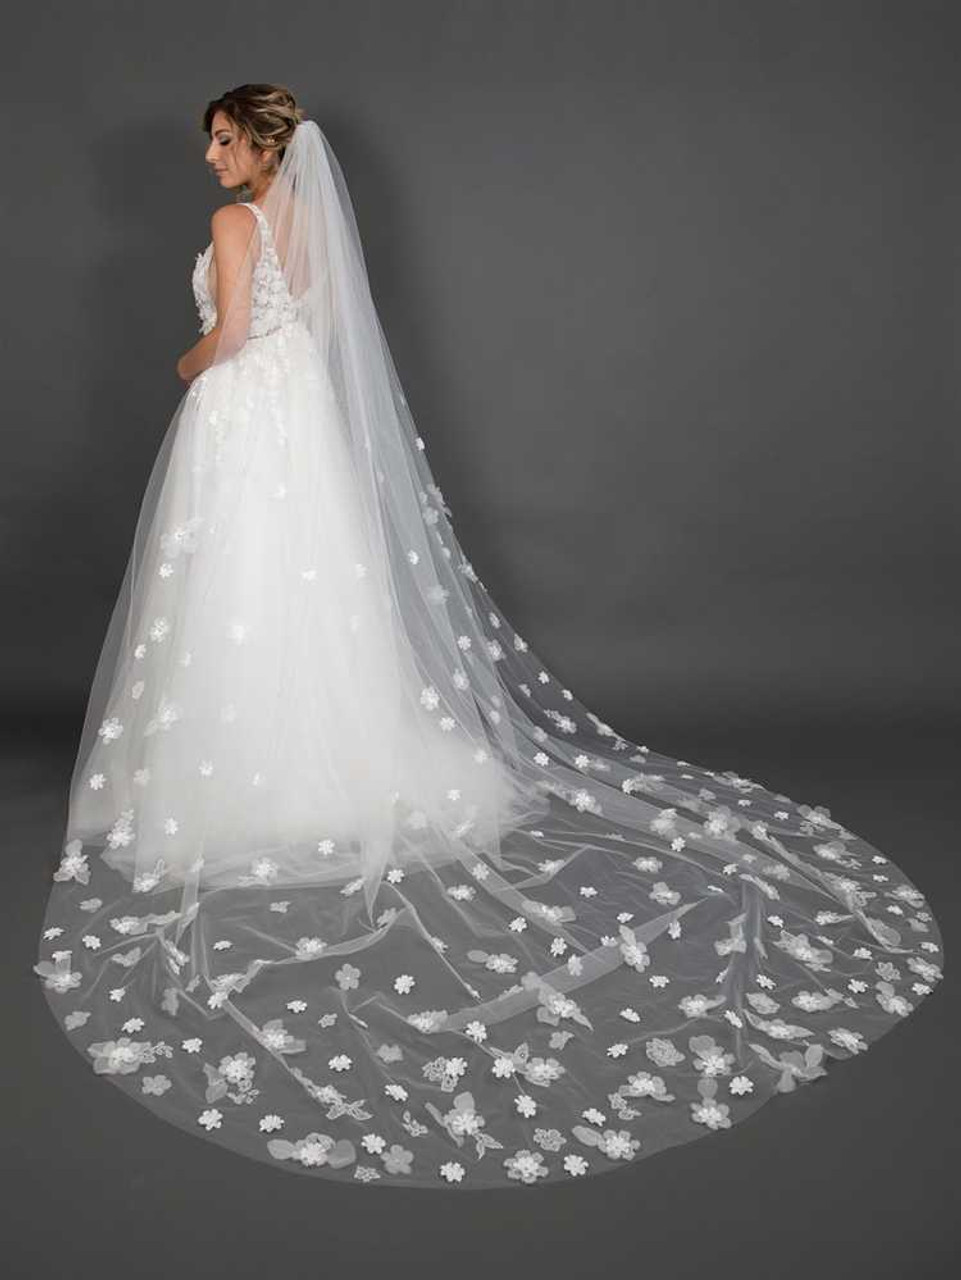 Small Flowers Veil Whit Scattered Pearls Floral Wedding Veil One Tier Veil  Long Veil Cathedral Length Veil With Comb 